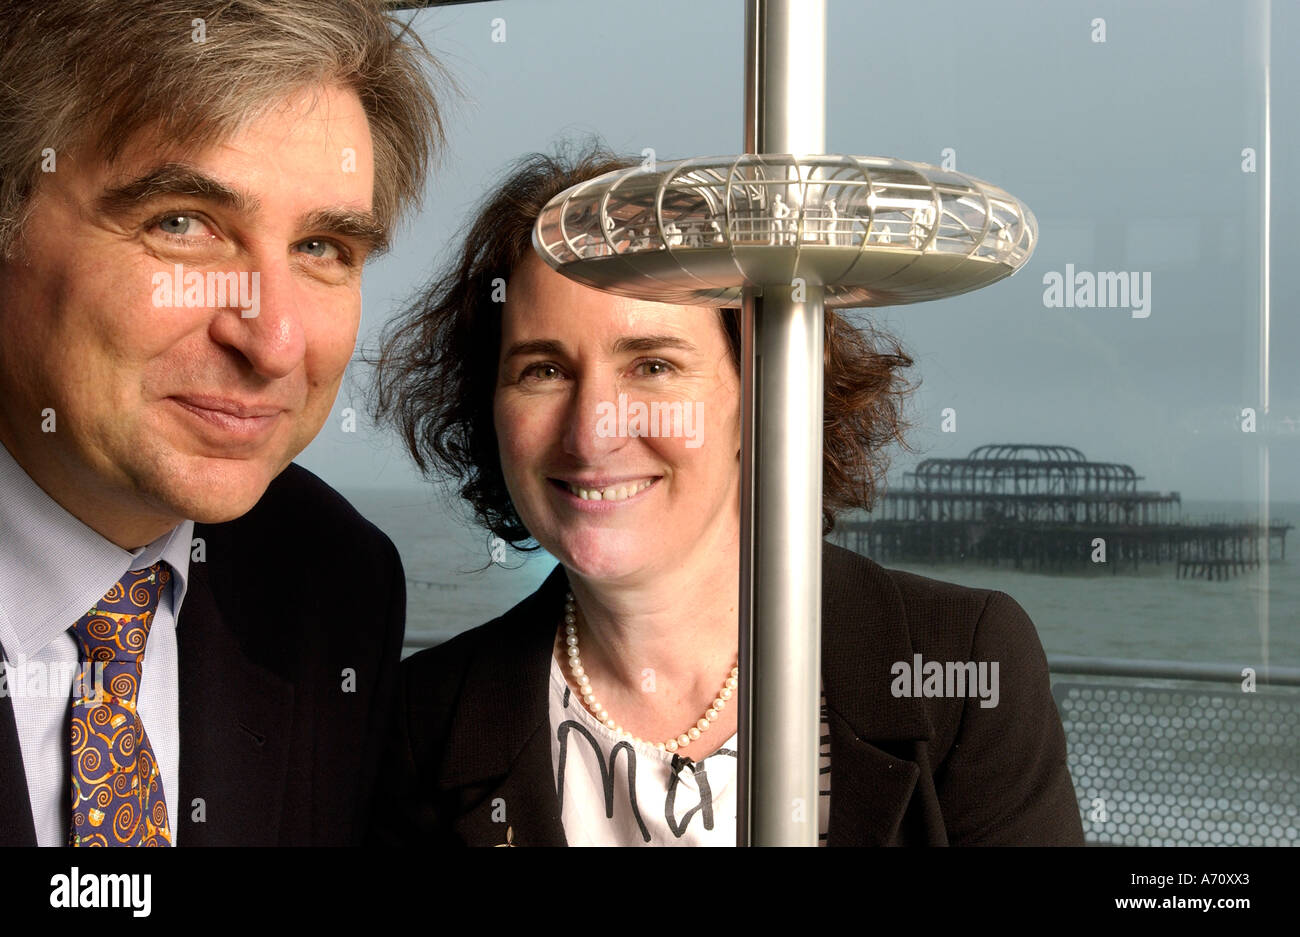 Architects <b>David Marks</b> and Julia Barfield designers of the London Eye with ... - architects-david-marks-and-julia-barfield-designers-of-the-london-A70XX3